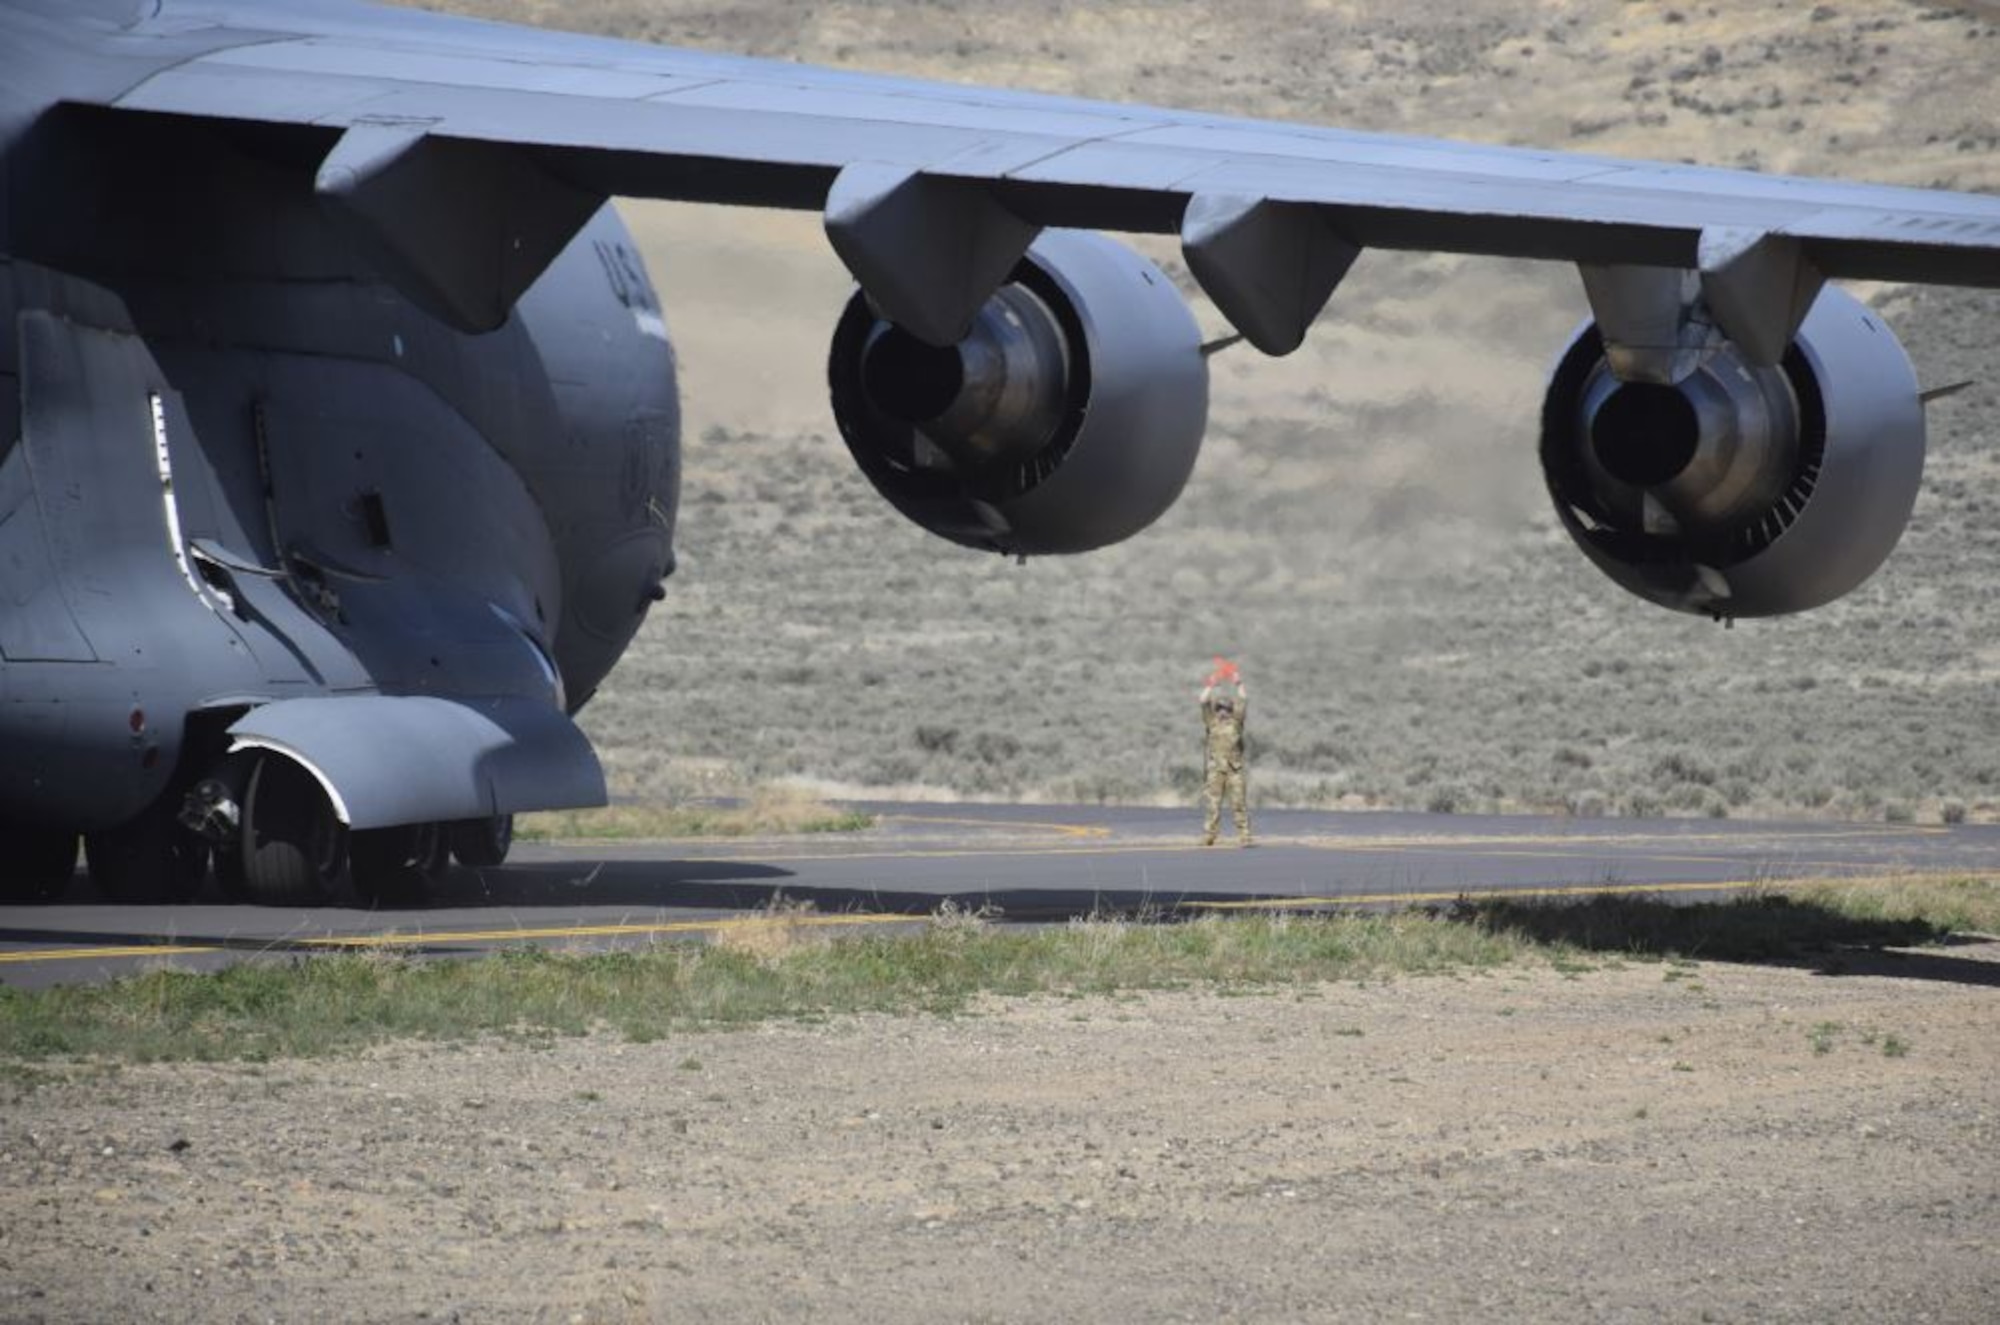 Tech. Sgt. Rachel Andrew, 8th Airlift Squadron loadmaster and Advanced Instructor Course student, marshals a C-17 Globemaster III on the Mettie Airstrip at Yakima Training Center, Washington, April 23, 2020. The AIC, taught out of the 57th Weapons Squadron at Joint Base Lewis-McChord, Wash., produces highly trained aircrew members in weapons systems across the U.S. Air Force and Defense Department. (Courtesy Photo)